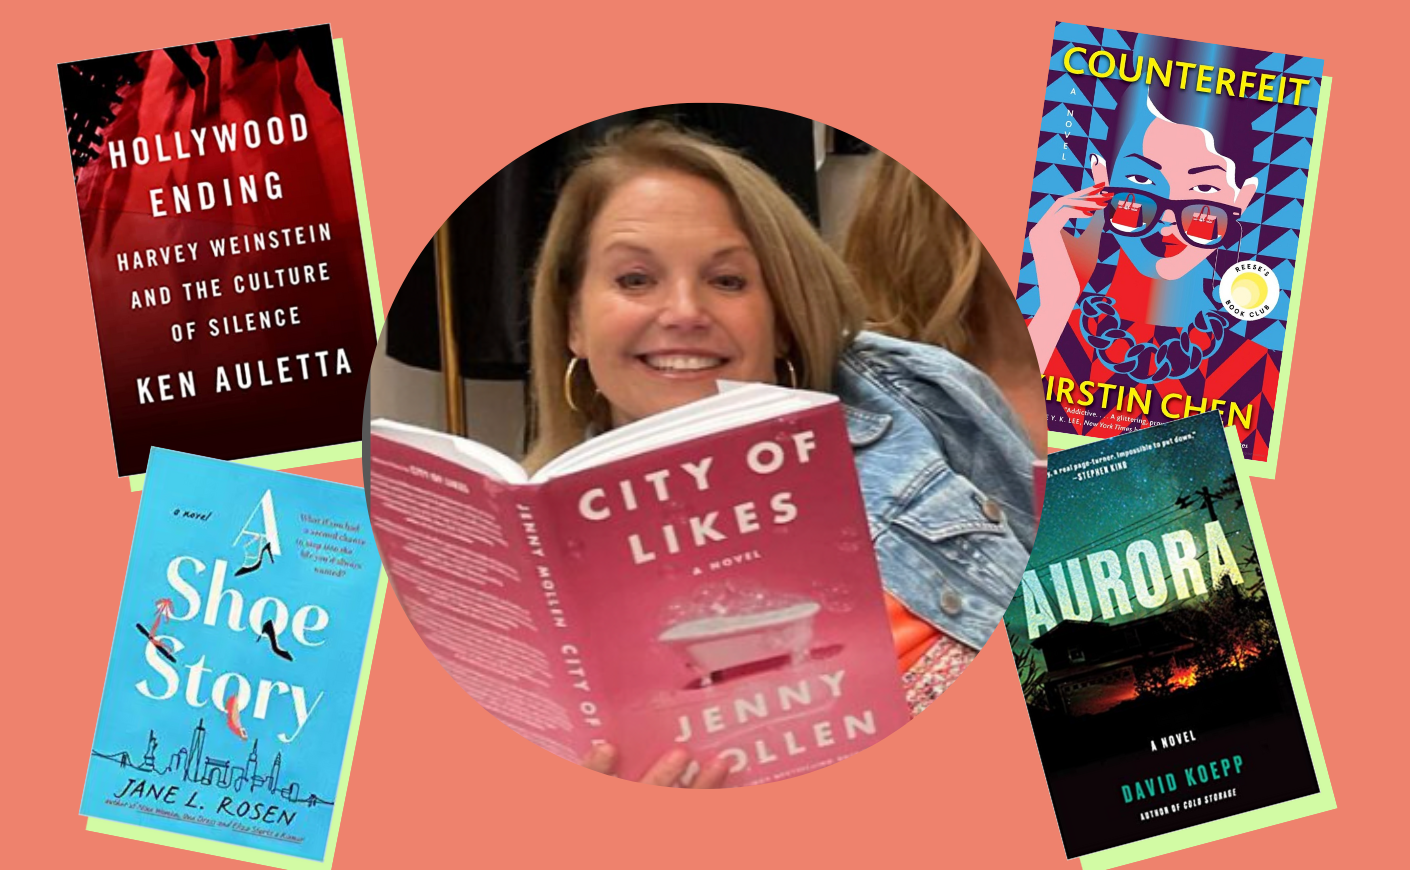 a picture of katie reading "City of Likes" with other books surrounding her